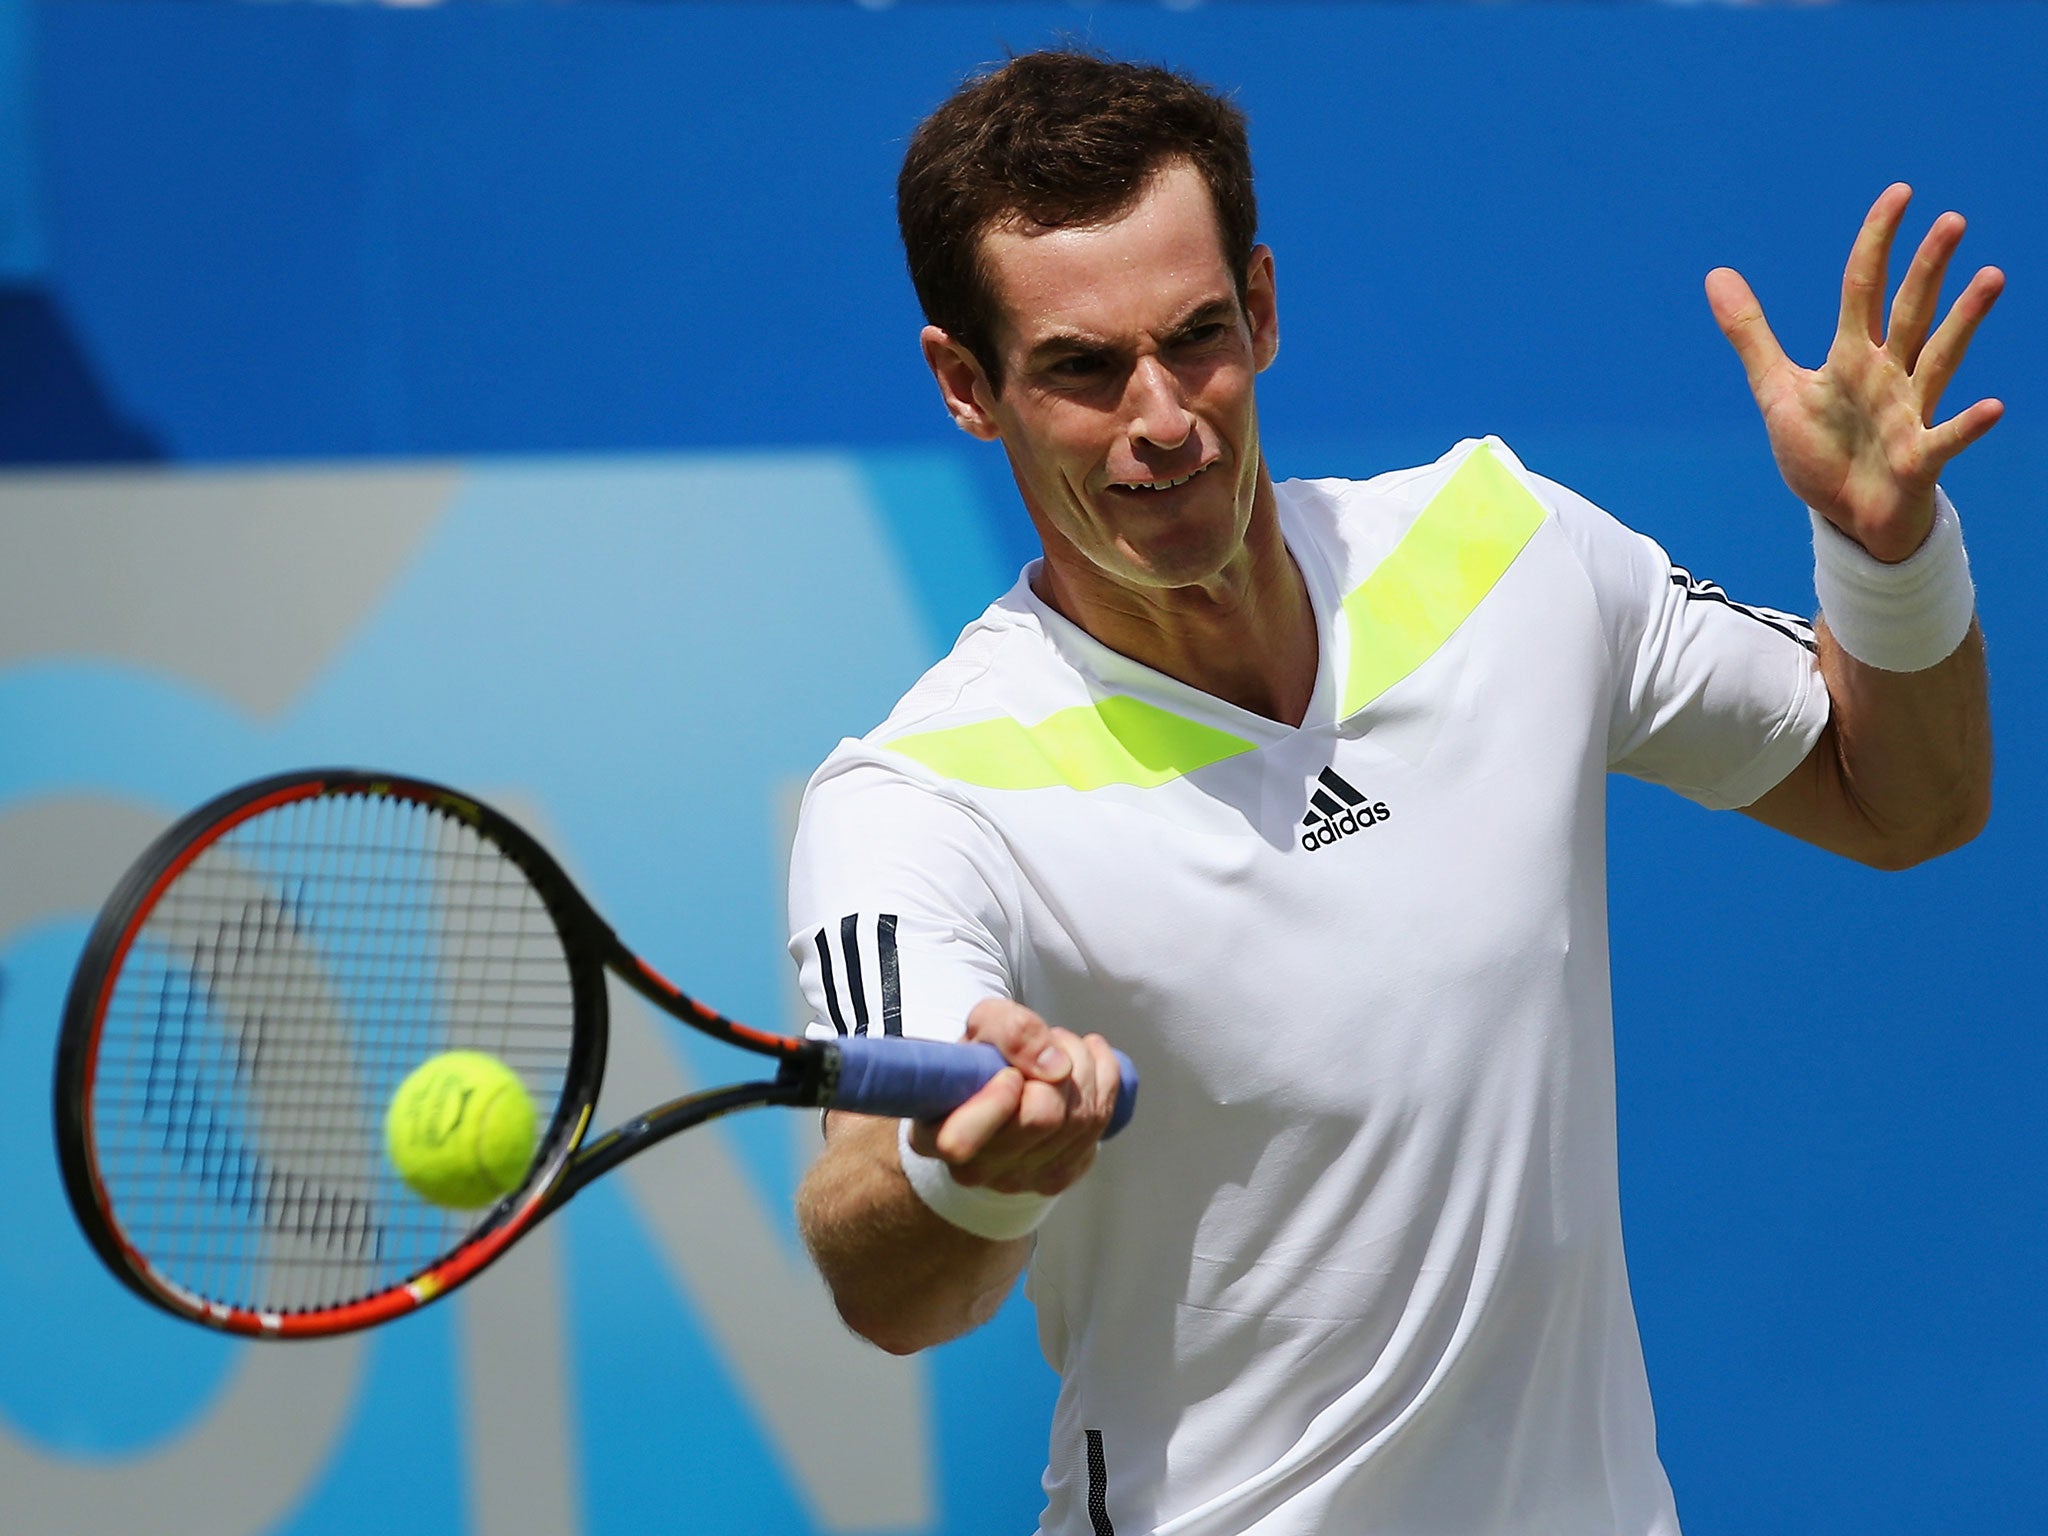 Andy Murray of Great Britain celebrates after winning against Paul-Henri Mathieu of France during their Men's Singles match on day three of the Aegon Championships